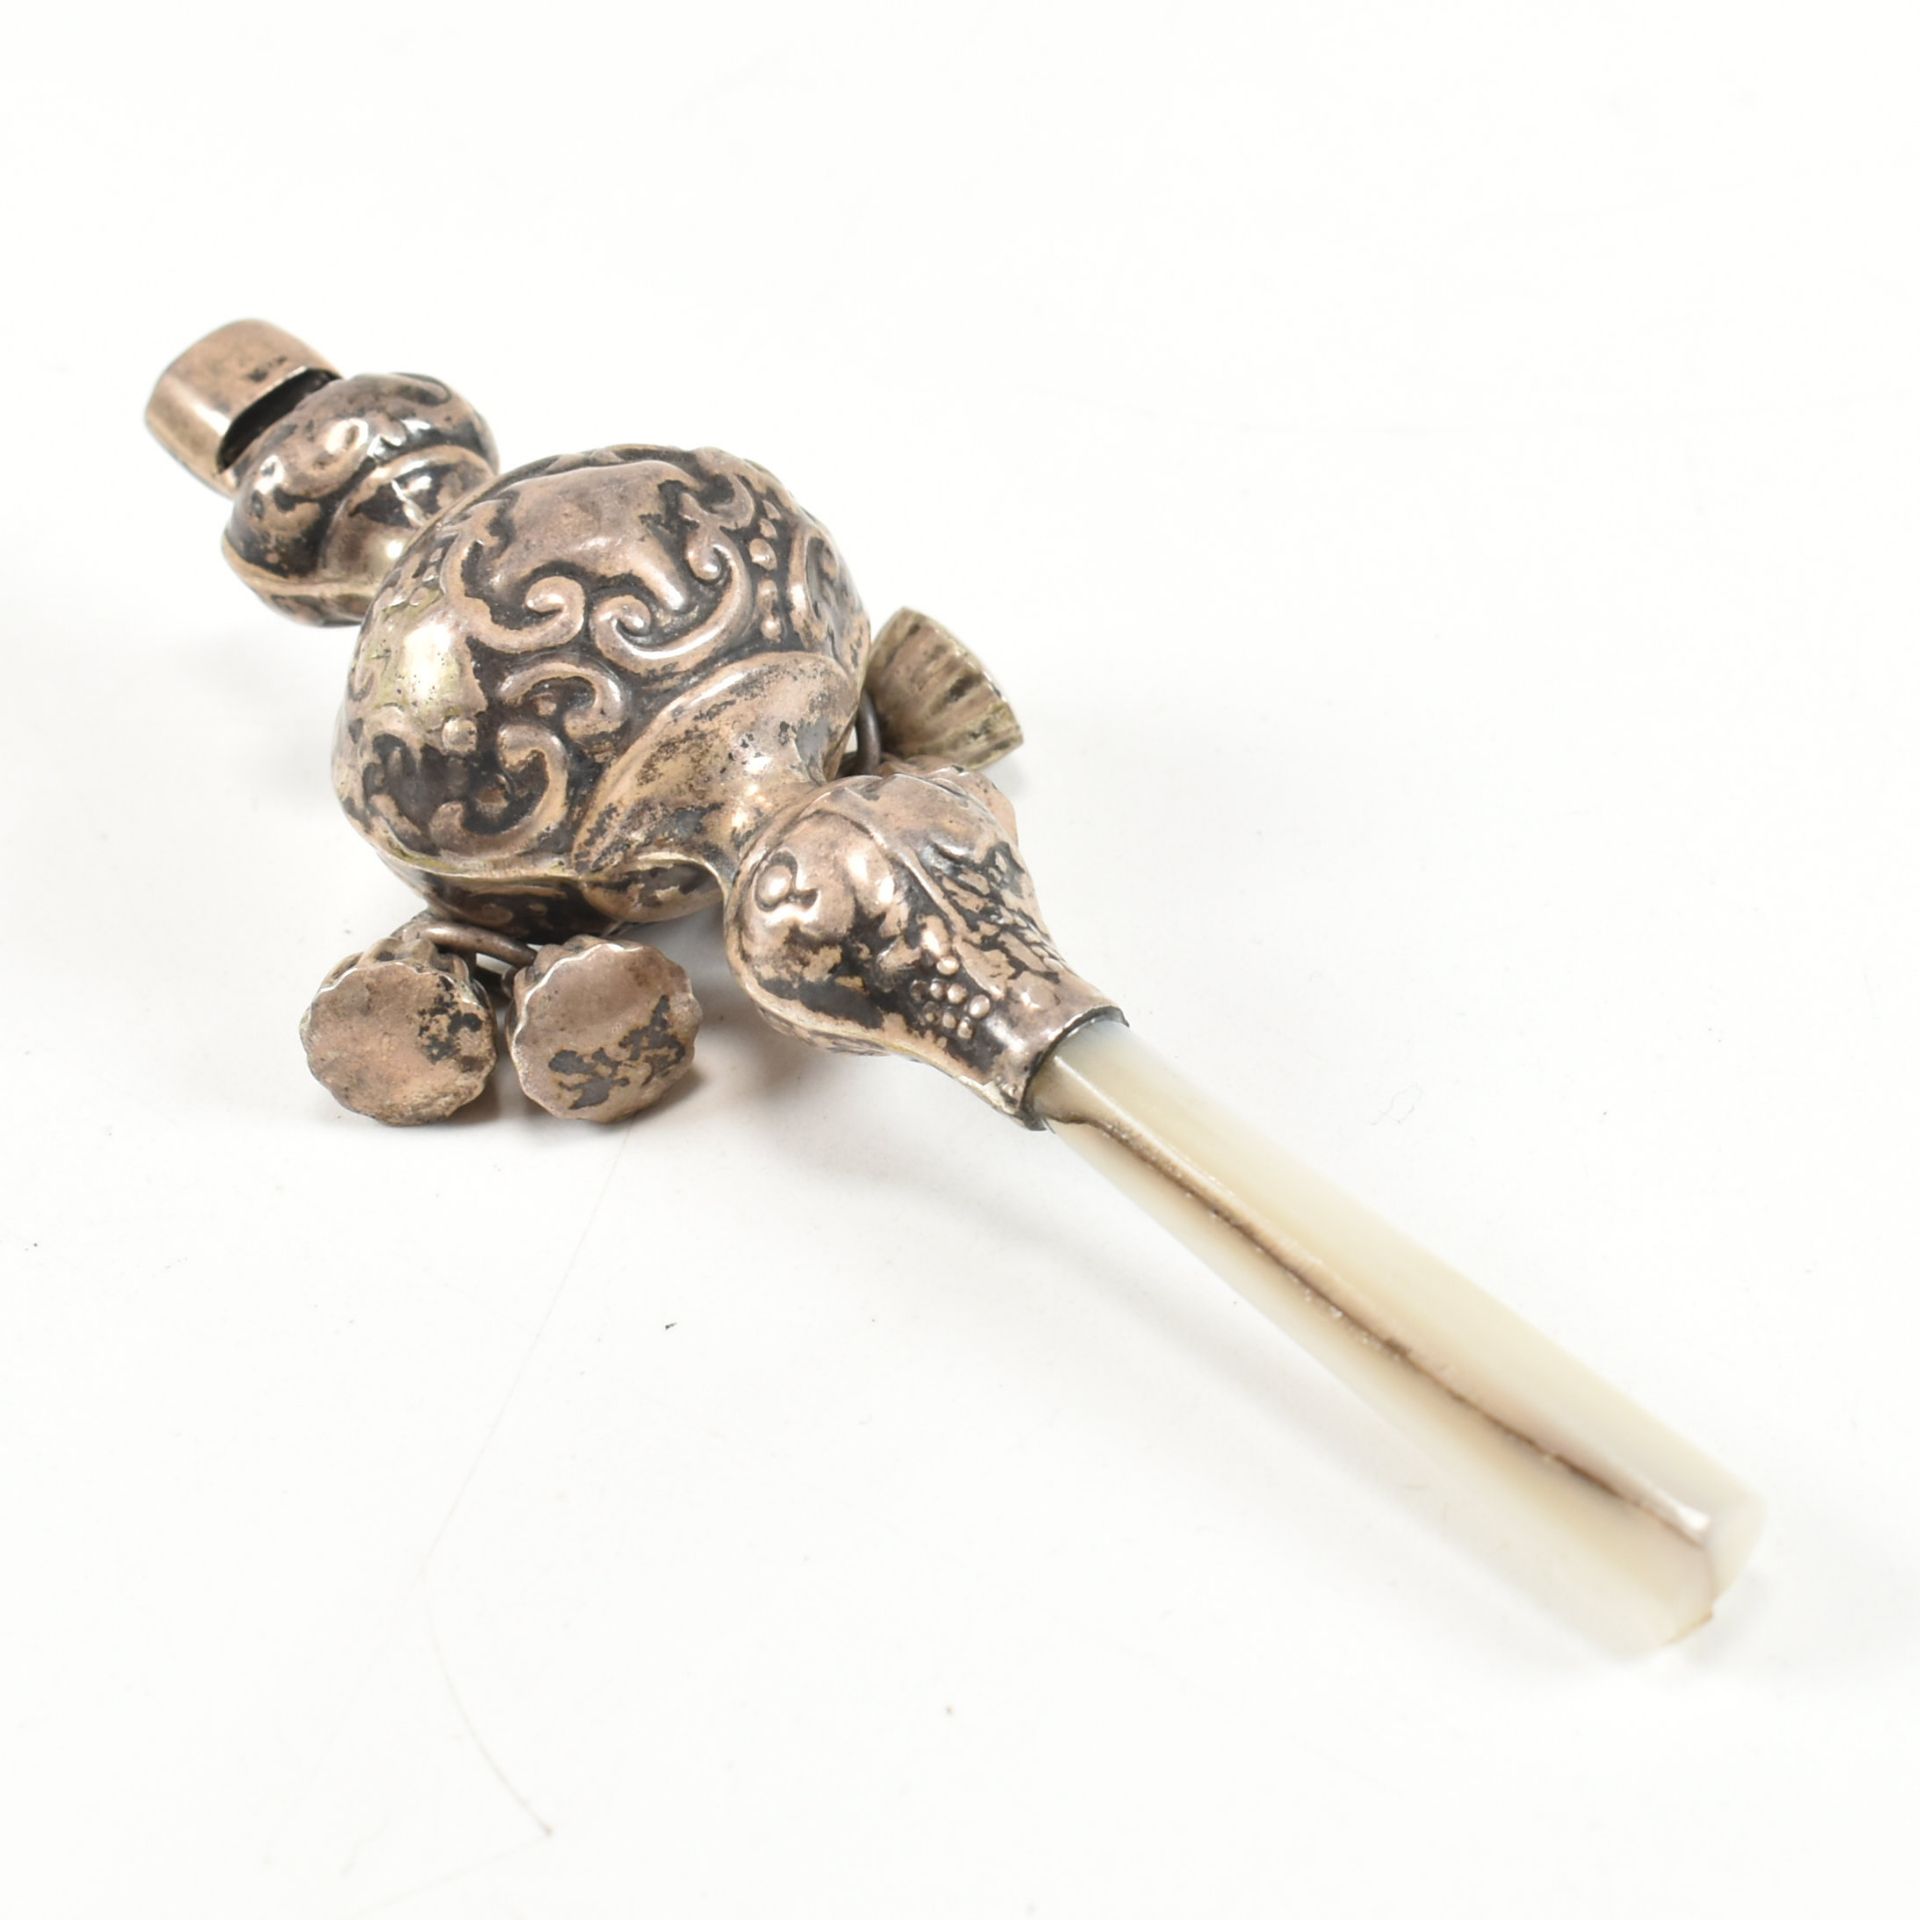 EDWARDIAN HALLMARKED SILVER & MOP BABYS RATTLE WHISTLE - Image 3 of 6